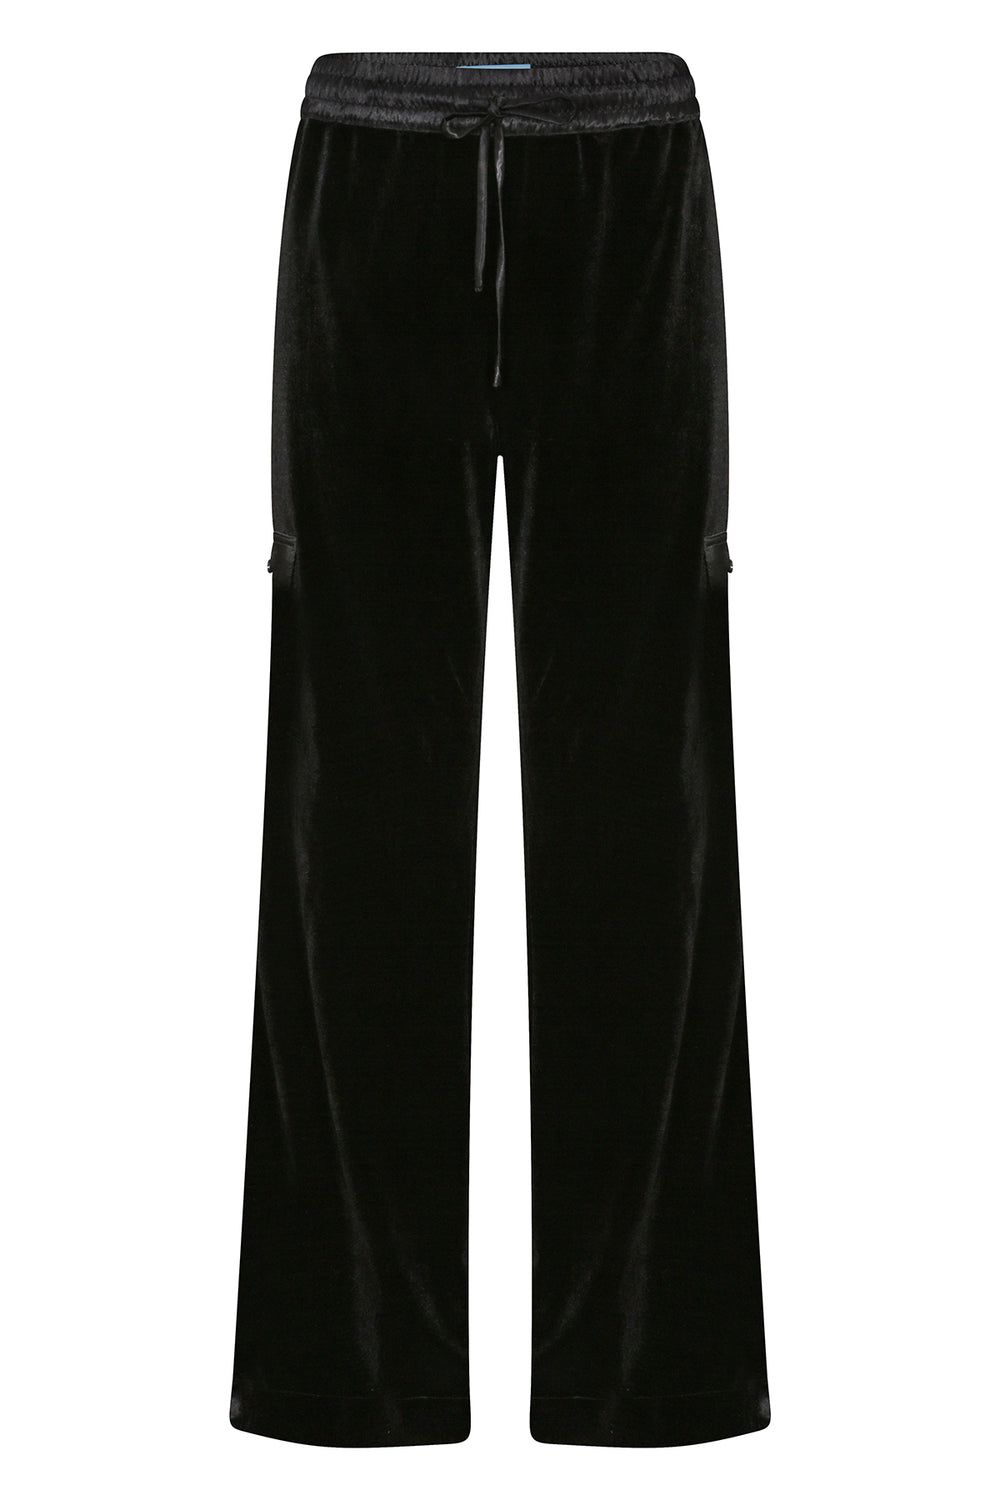 Black Cargo Trousers - noemotions-store